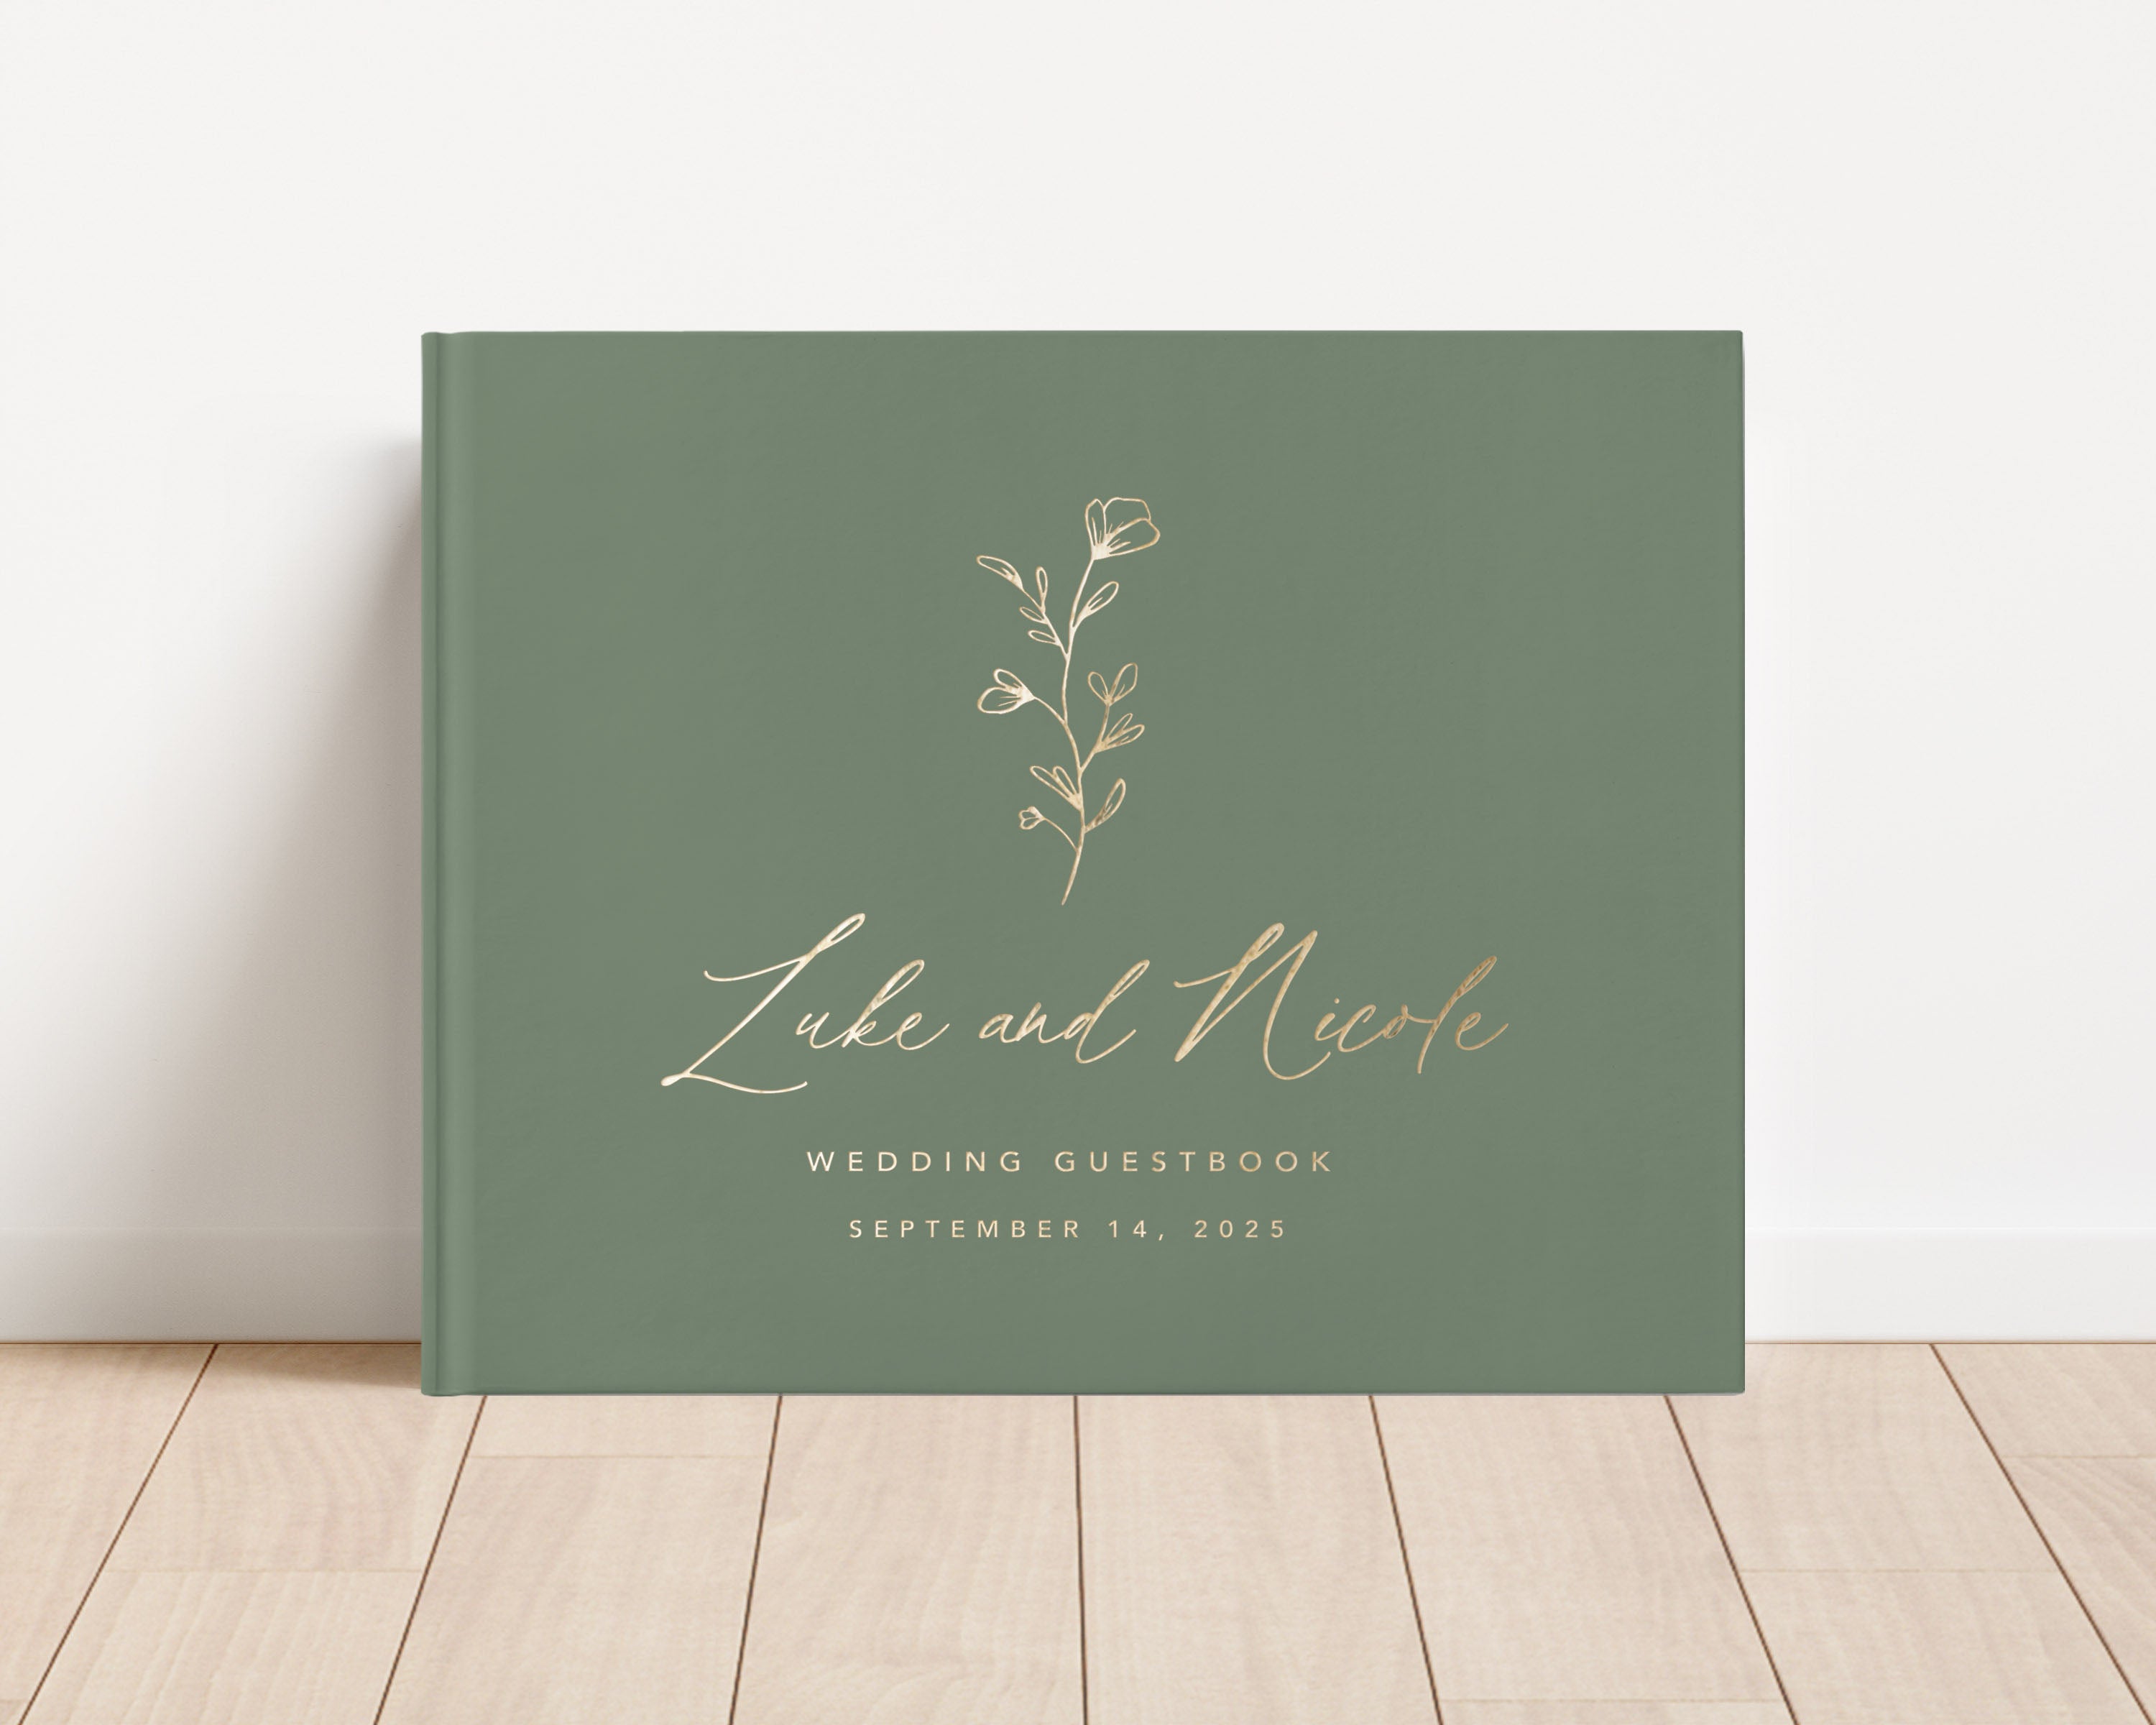 Luxury wedding guest book with custom gold foil text and sage hardback cover.